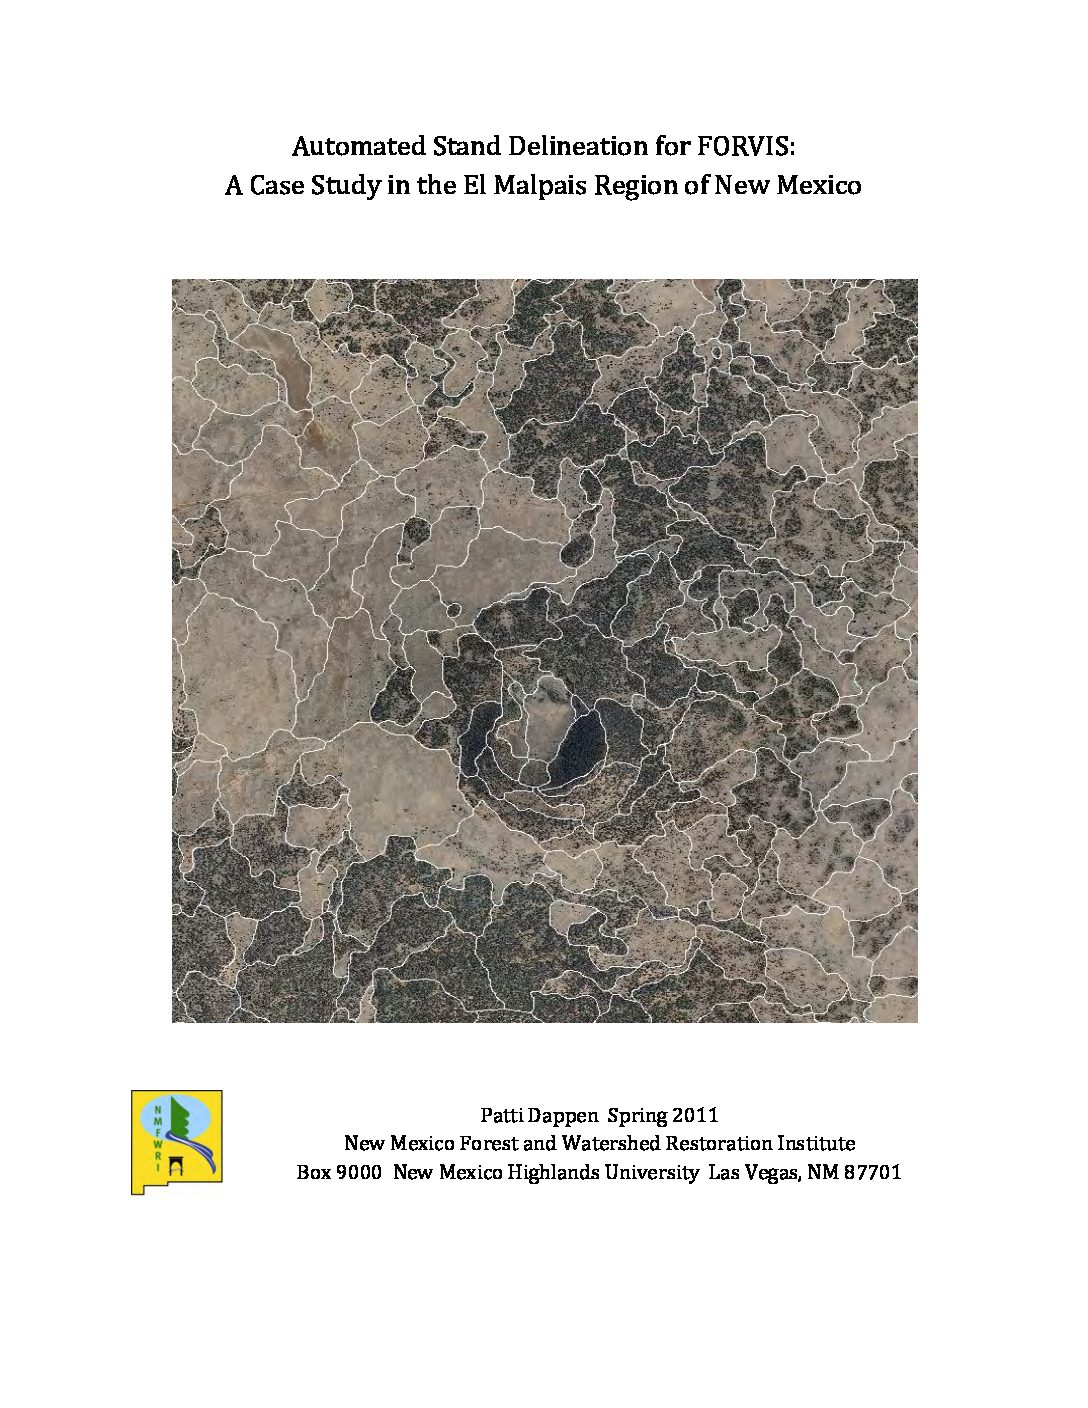 Automated Stand Delineation for FORVIS: A Case Study in the El Malpais Region of New Mexico